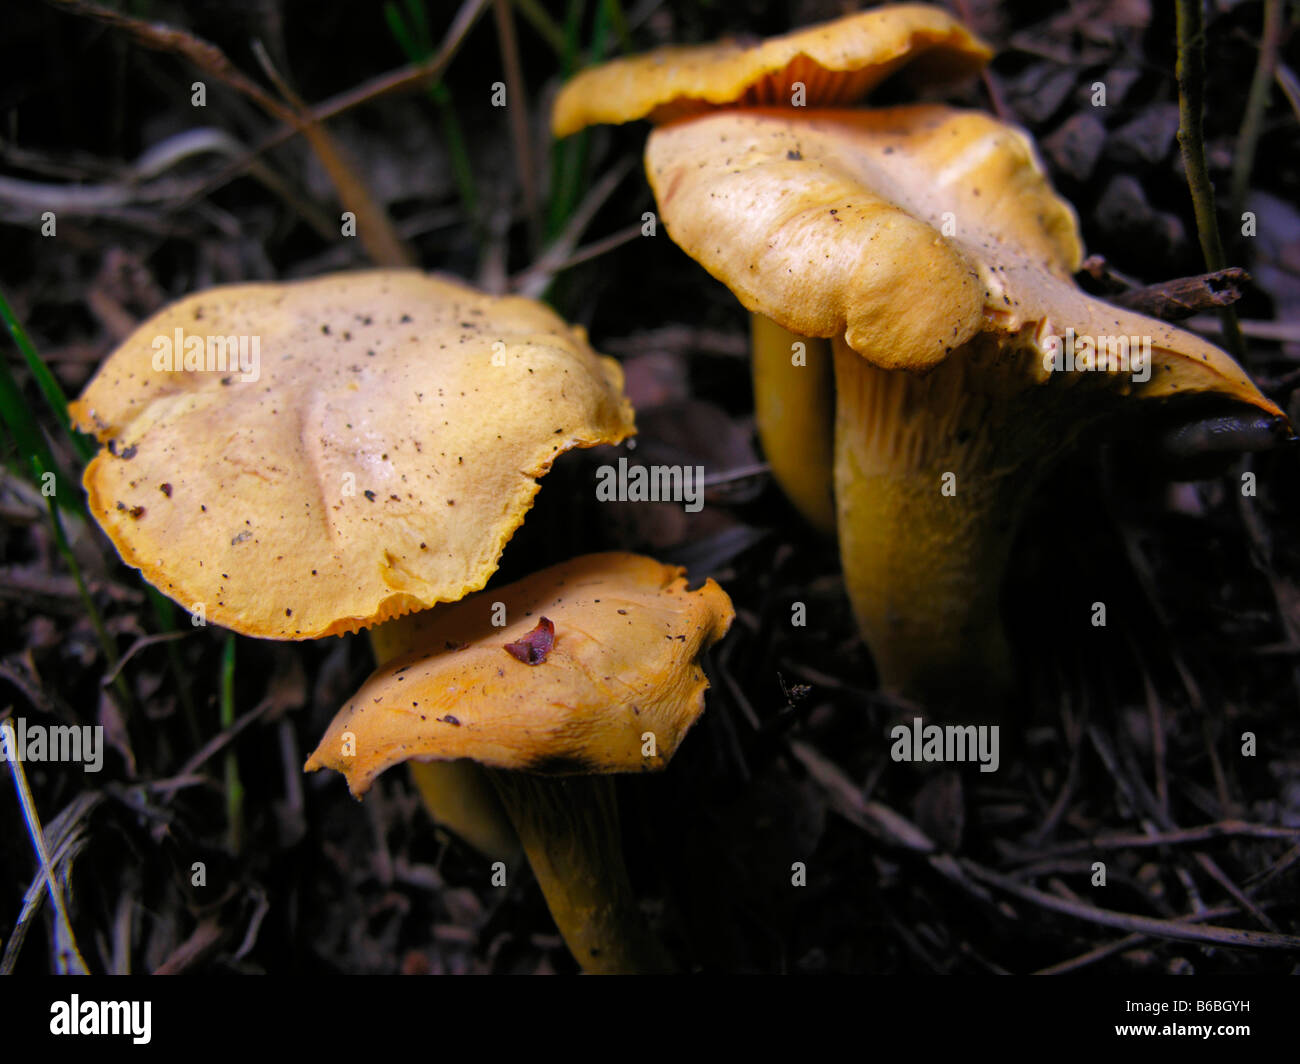 Close-up of mushrooms growing in field Stock Photo